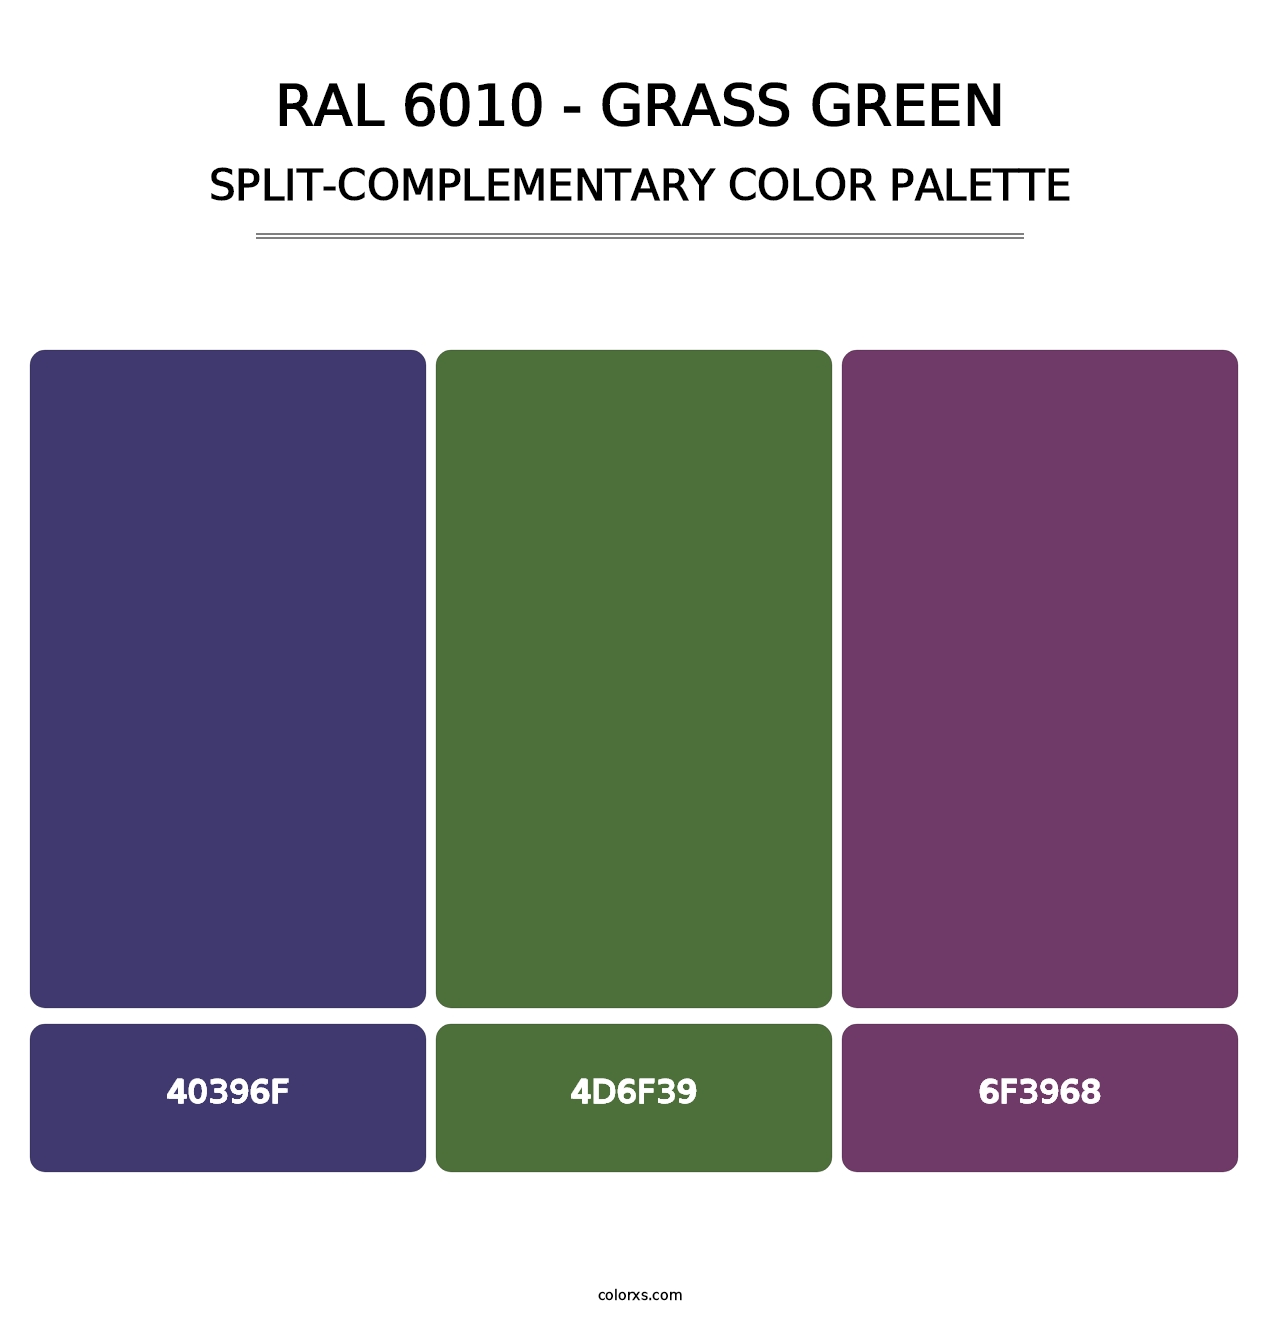 RAL 6010 - Grass Green - Split-Complementary Color Palette